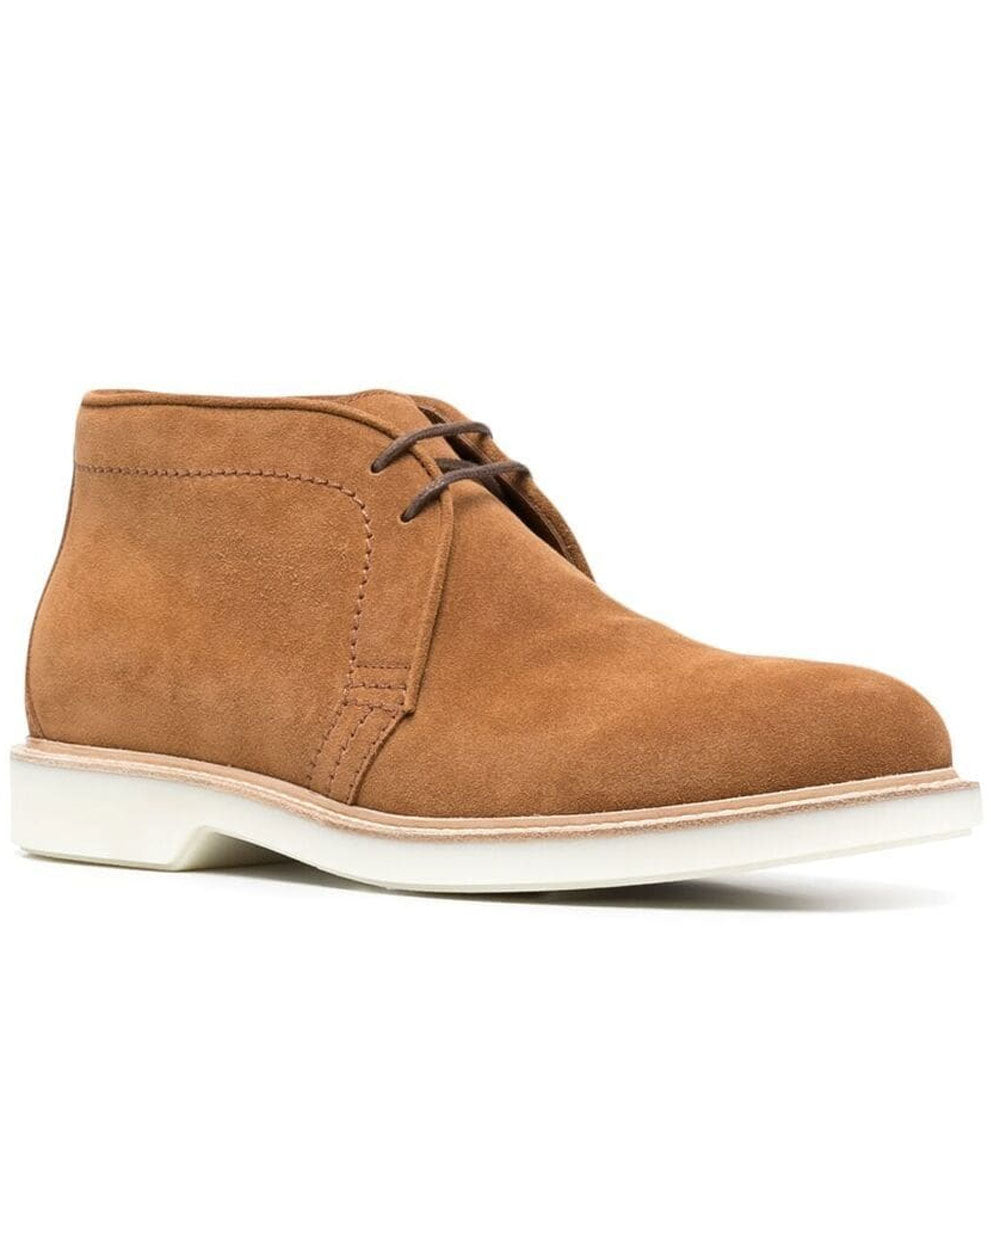 Light Brown Suede Lace Up Chukka Boots